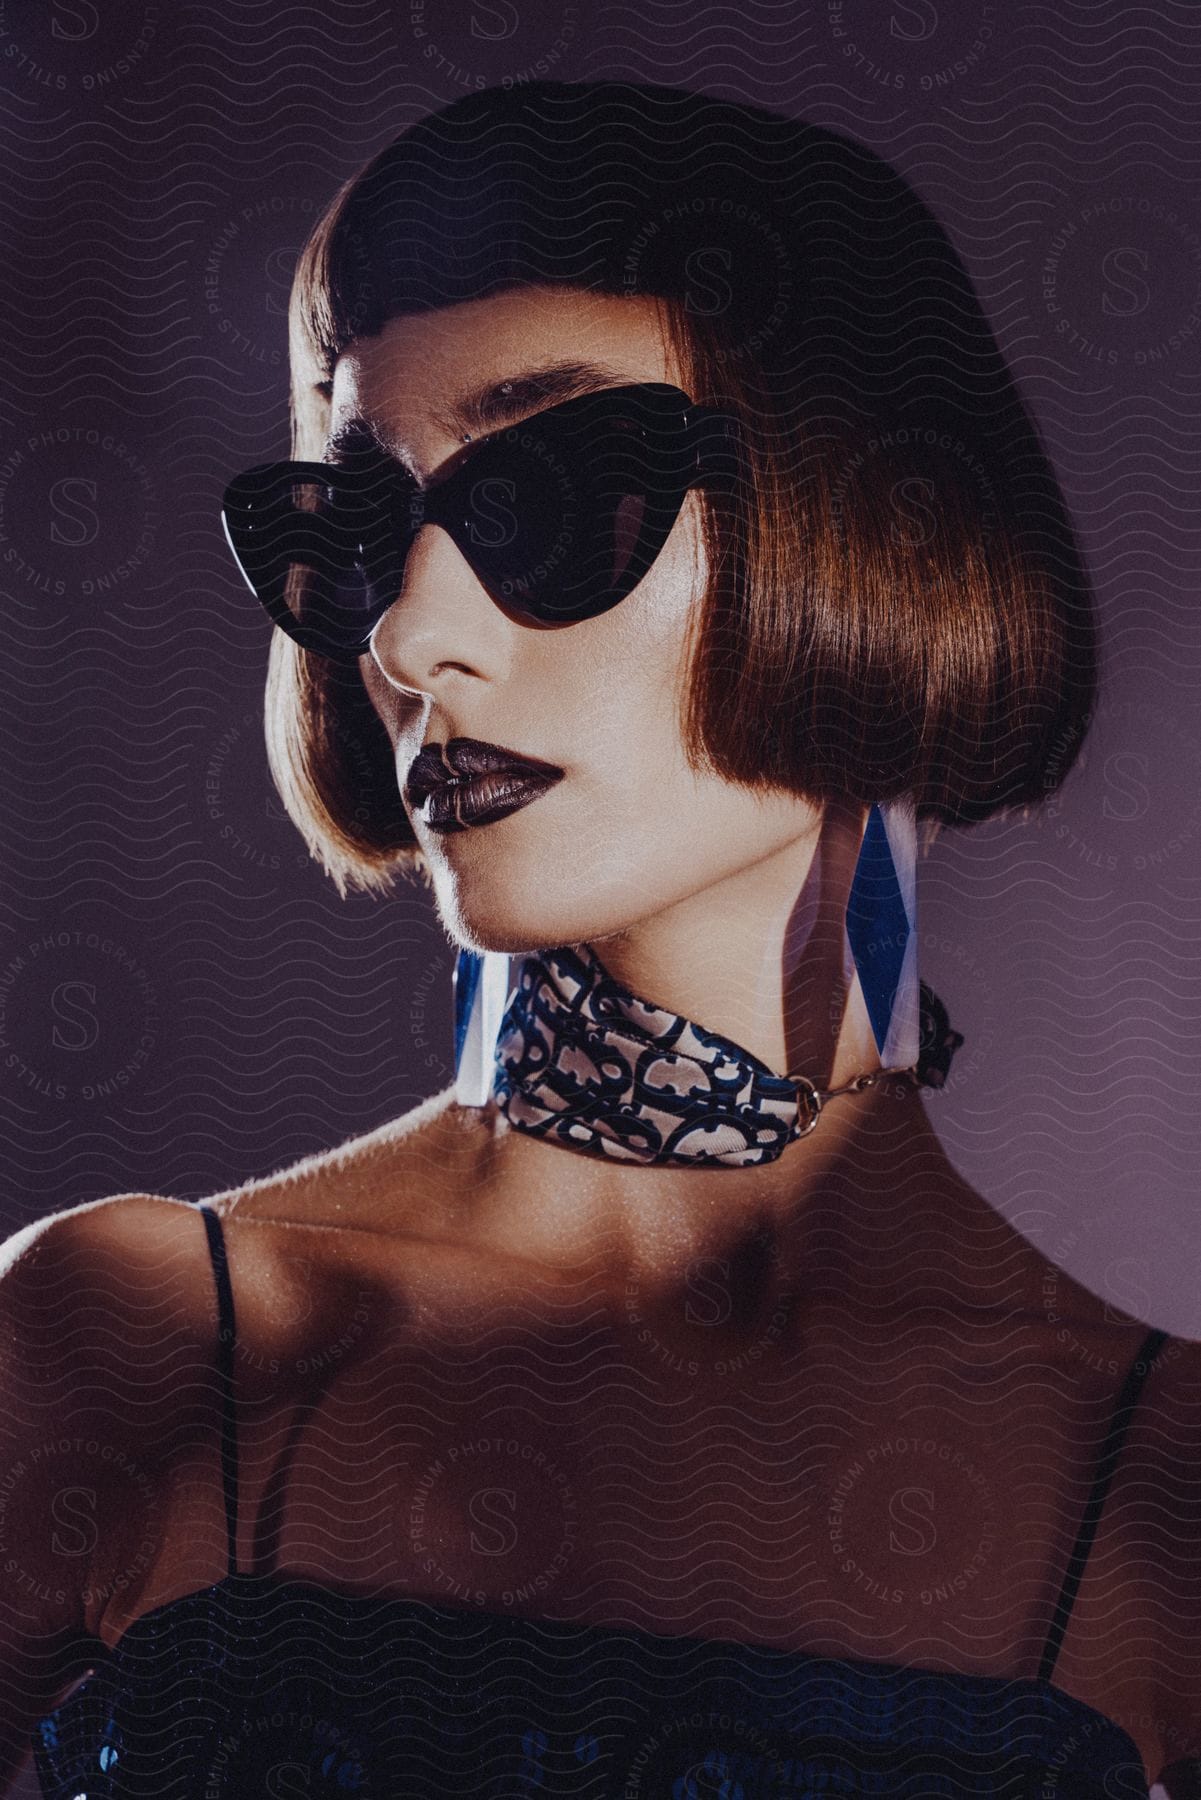 A woman wearing oversized sunglasses, a patterned neck scarf, and dark lipstick, with a sharp bob haircut.